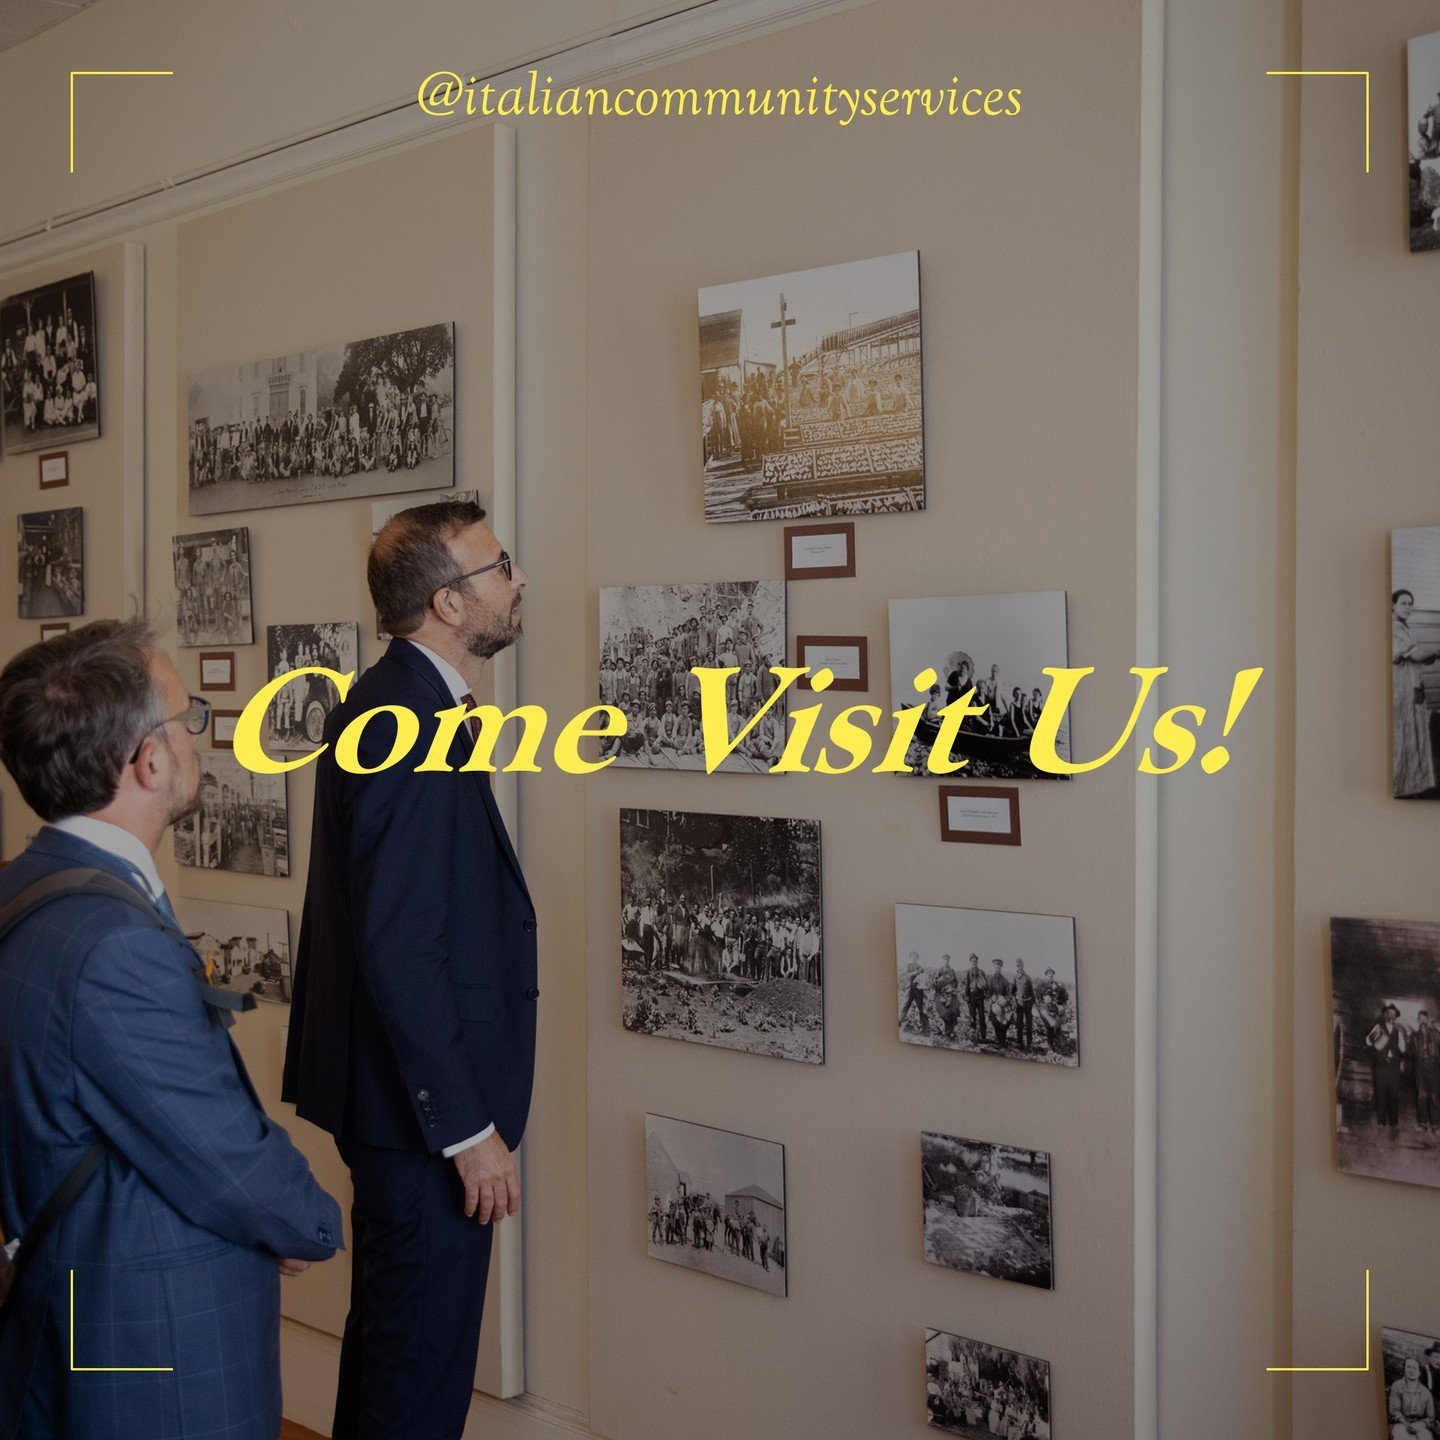 Have you heard about  Italian Community Services and want to come and visit us at Casa Fugazi? 

If you are Italian or Italian American, please  come discover our Large Heritage Room, filled with history waiting to be explored through numerous photog